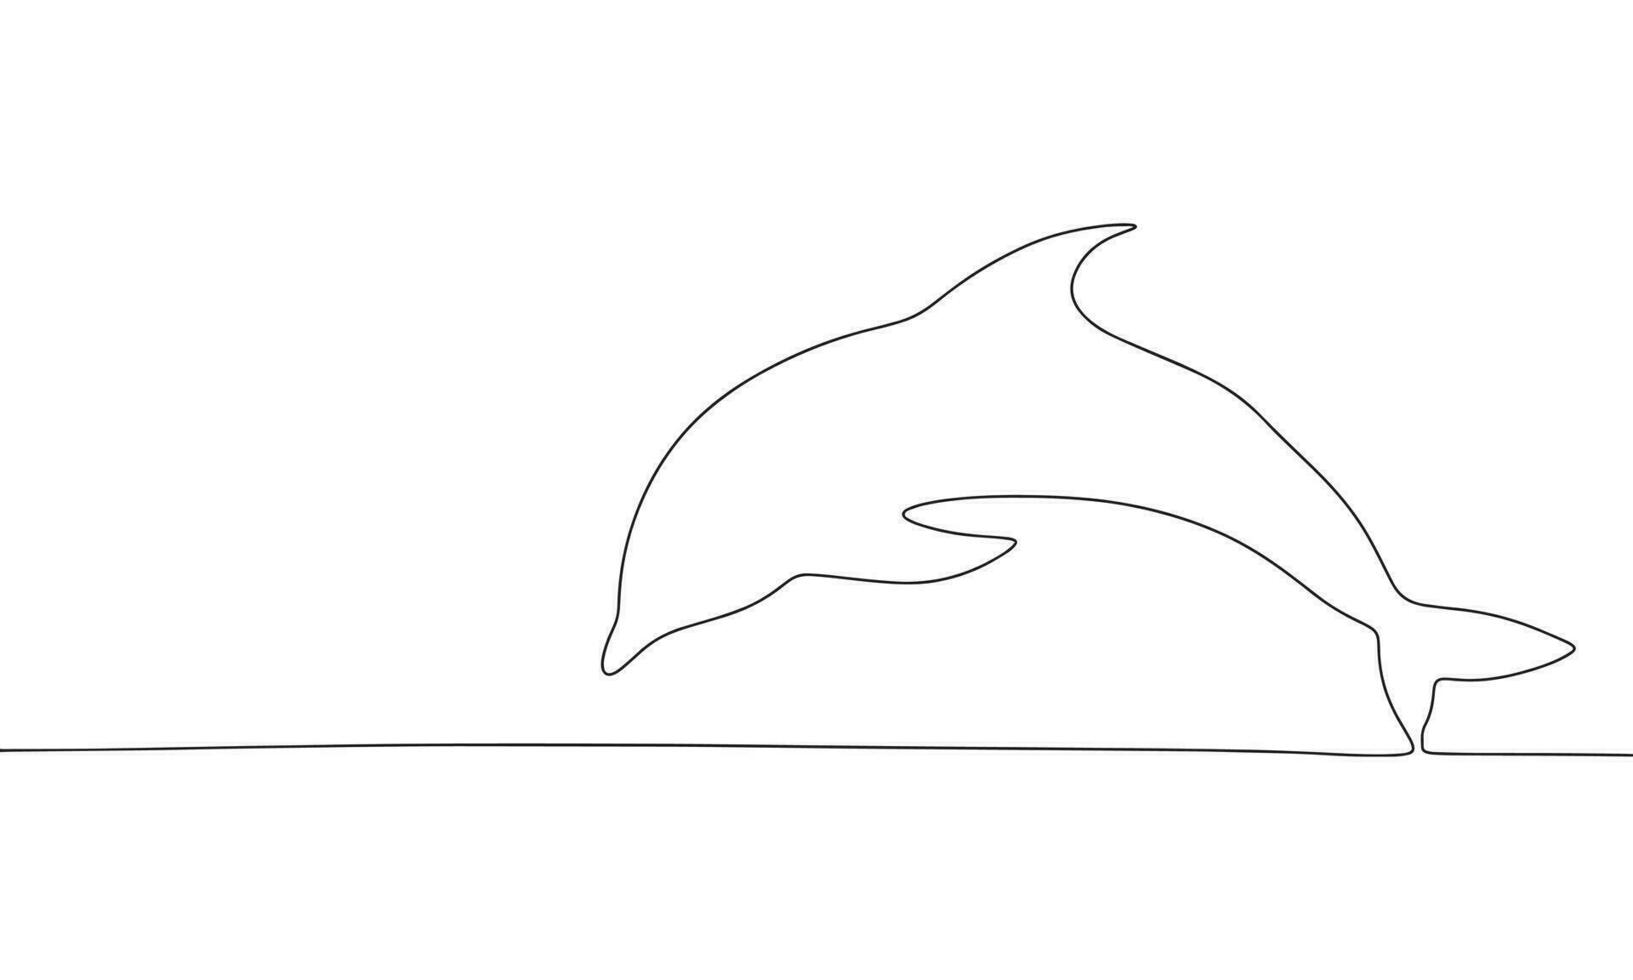 One line dolphin. Line art dolphin silhouette. One line continuous ocean banner. Outline vector illustration.